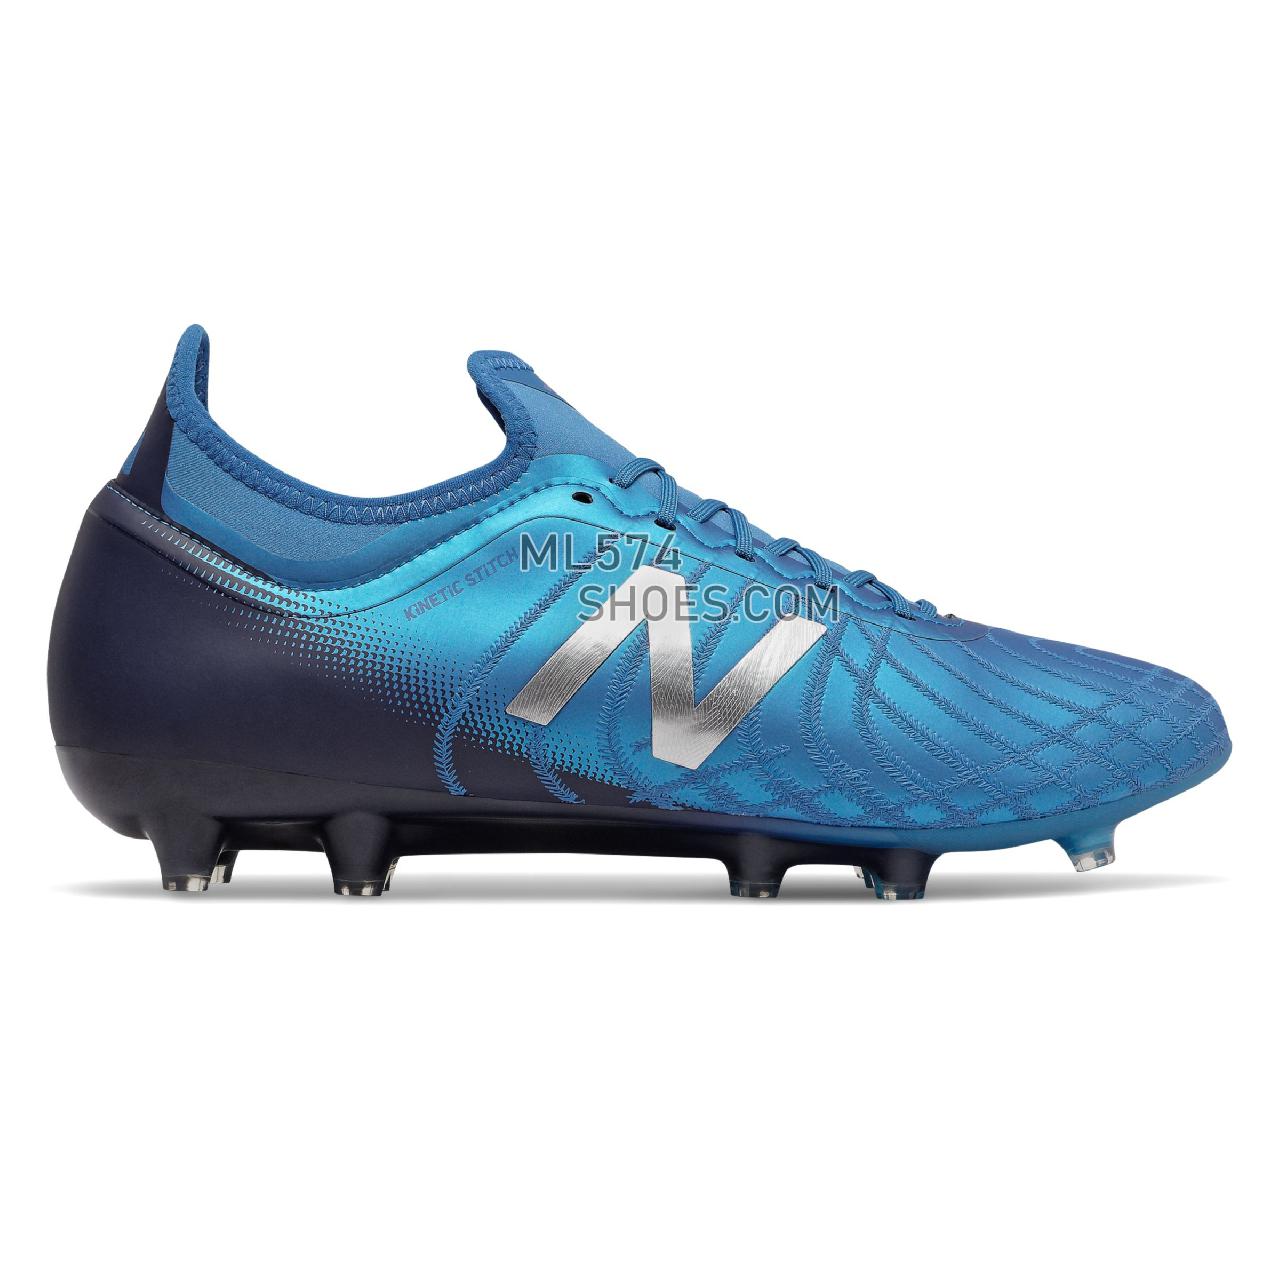 New Balance Tekela v2 Magia FG - Men's Soccer - Vision Blue with Neo Classic Blue and Team Navy - MSTMFVC2